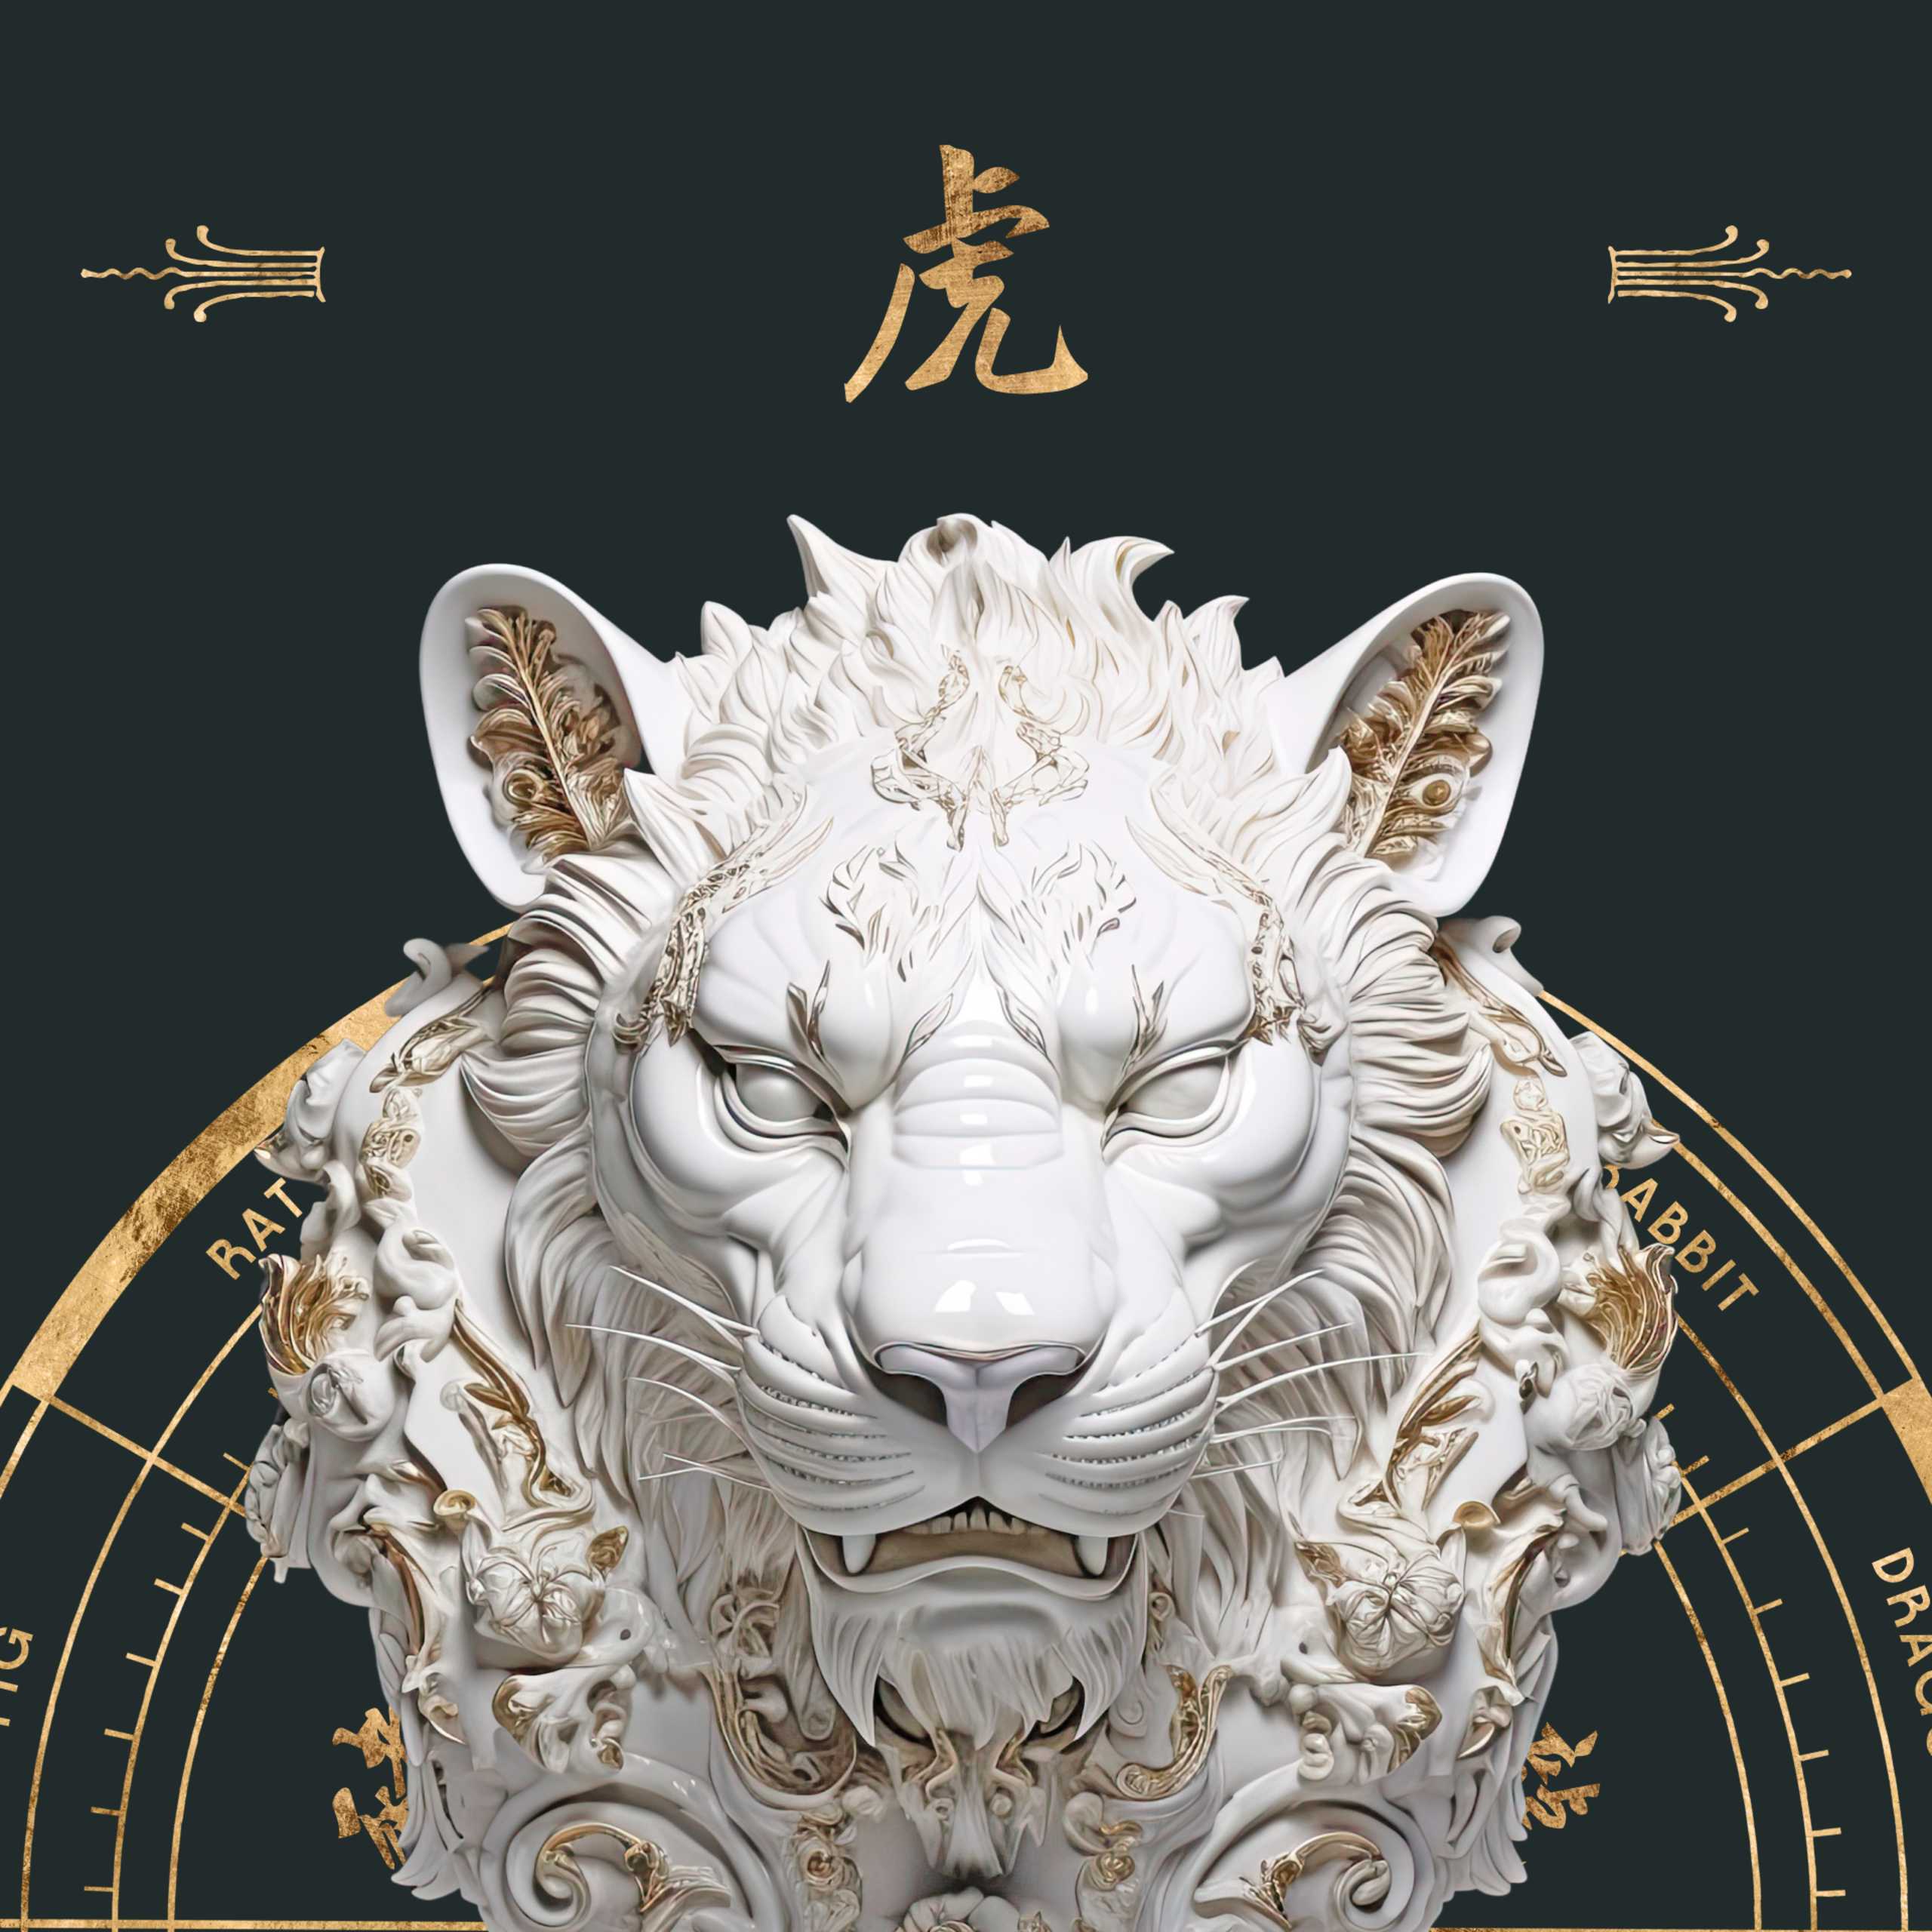 Tiger Chinese Zodiac Sign